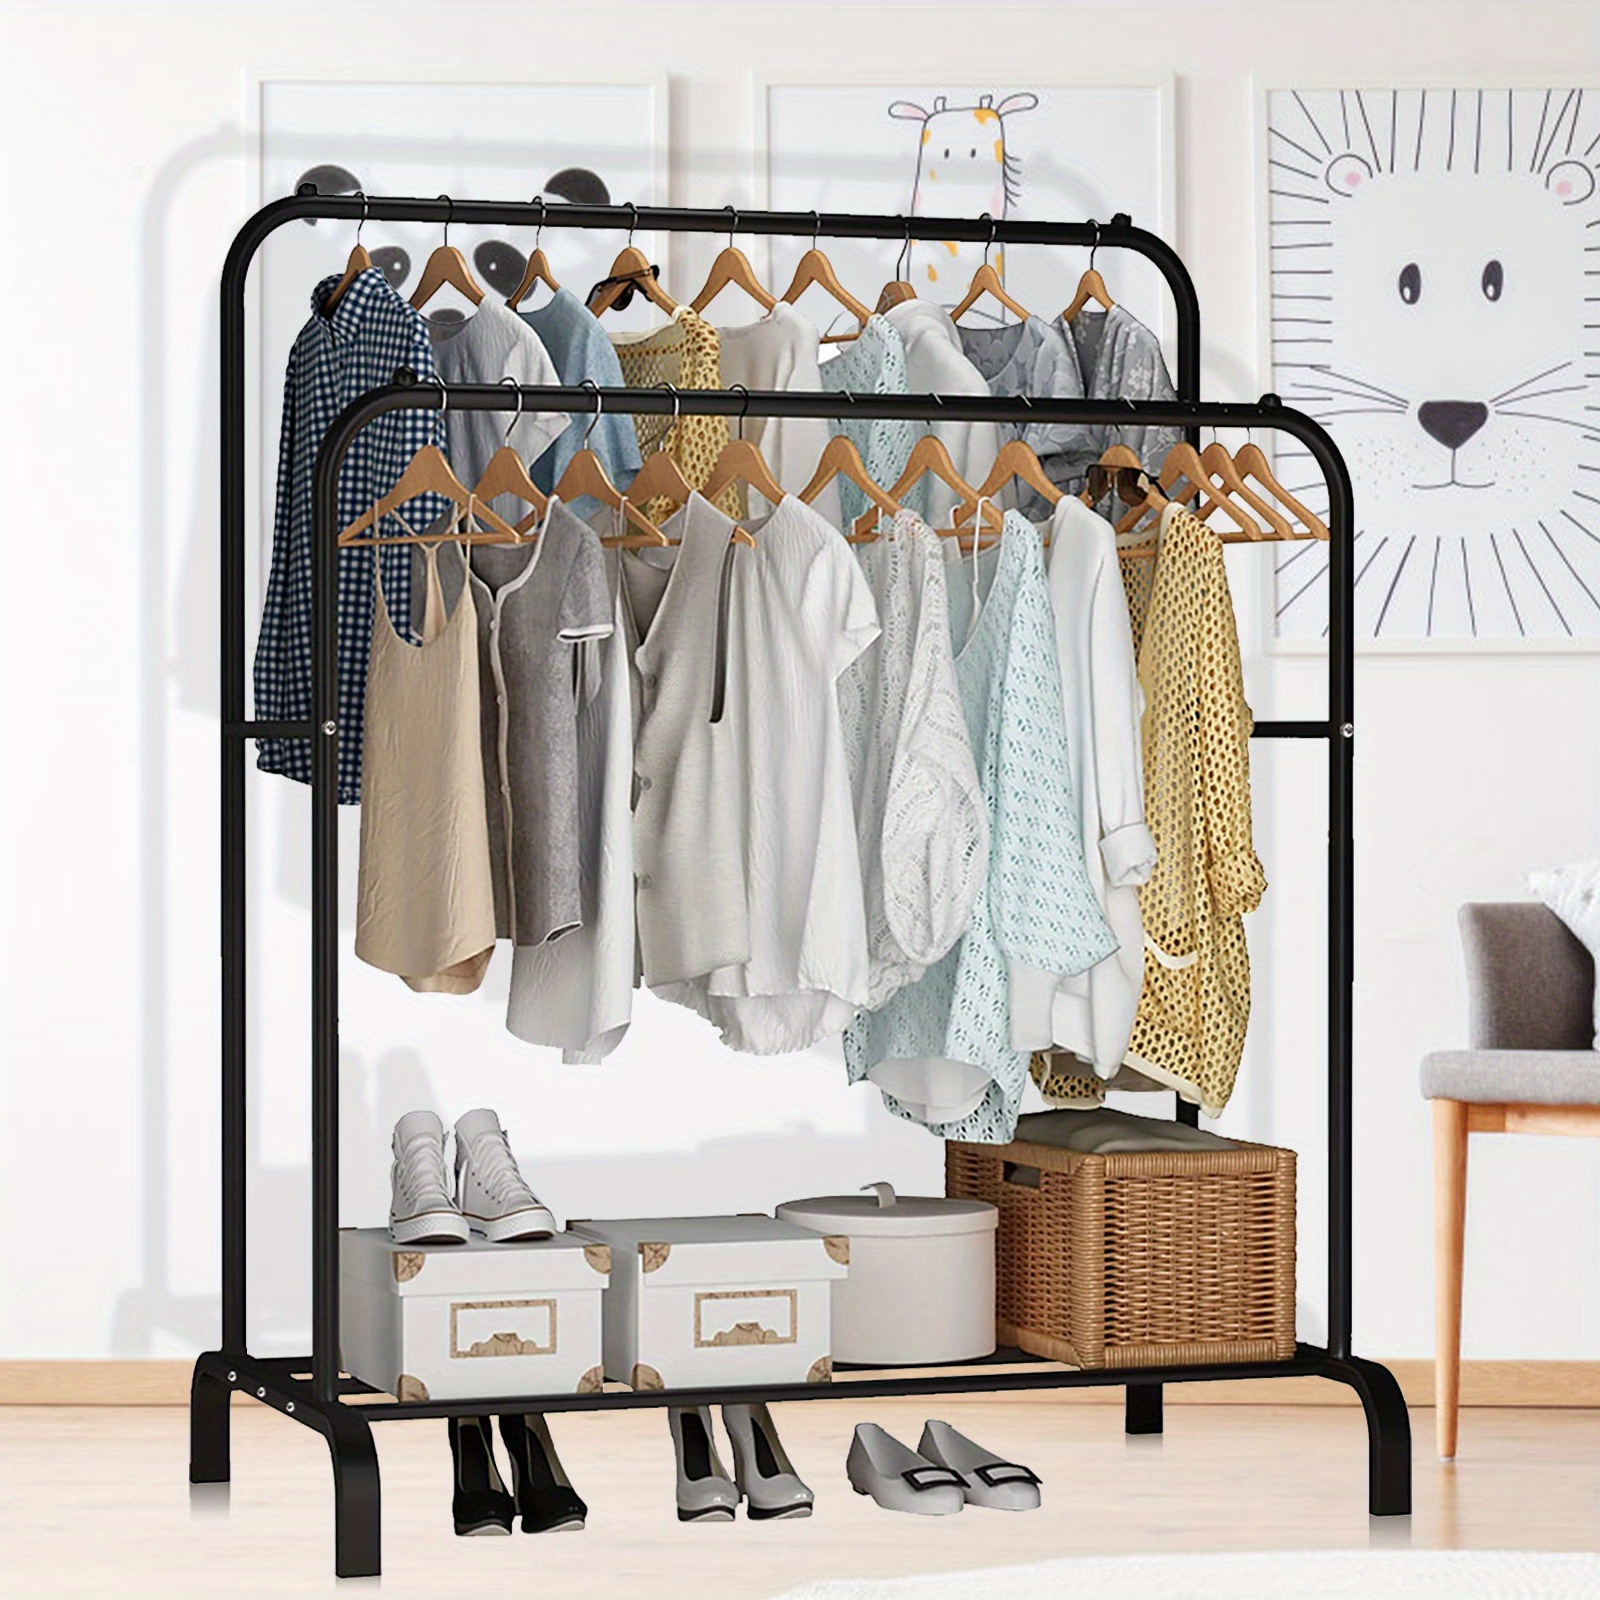 

Clothing Garment Coat Rack Freestanding Metal Clothes Storage Shelves Shoes Shelving Unit Stand Double Rail For Home Bedroom Office School Black